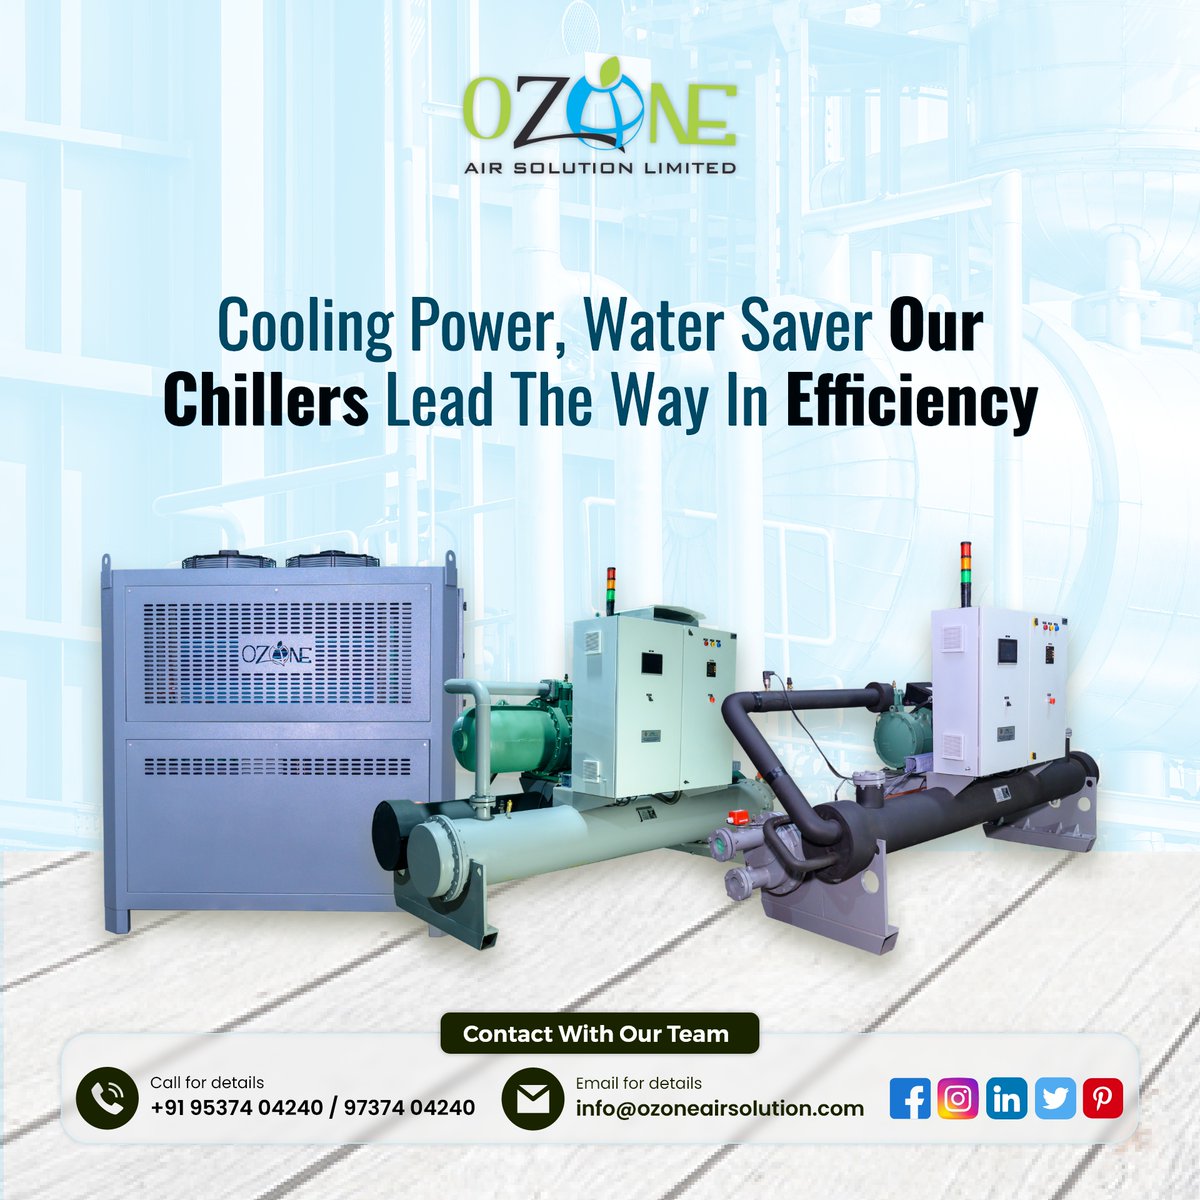 Stay Cool and Eco-Friendly with Ozone Air Solution Chillers! 🌬️💧

#OzoneAirSolution #EfficientCooling #WaterSaver #EcoFriendlyTech #ChillerSystems #ClimateControl #SustainableCooling #InnovationInAir #ContactUs #StayCoolWithOzone #MadeInIndia #AllTypeOfChiller #Manufacture